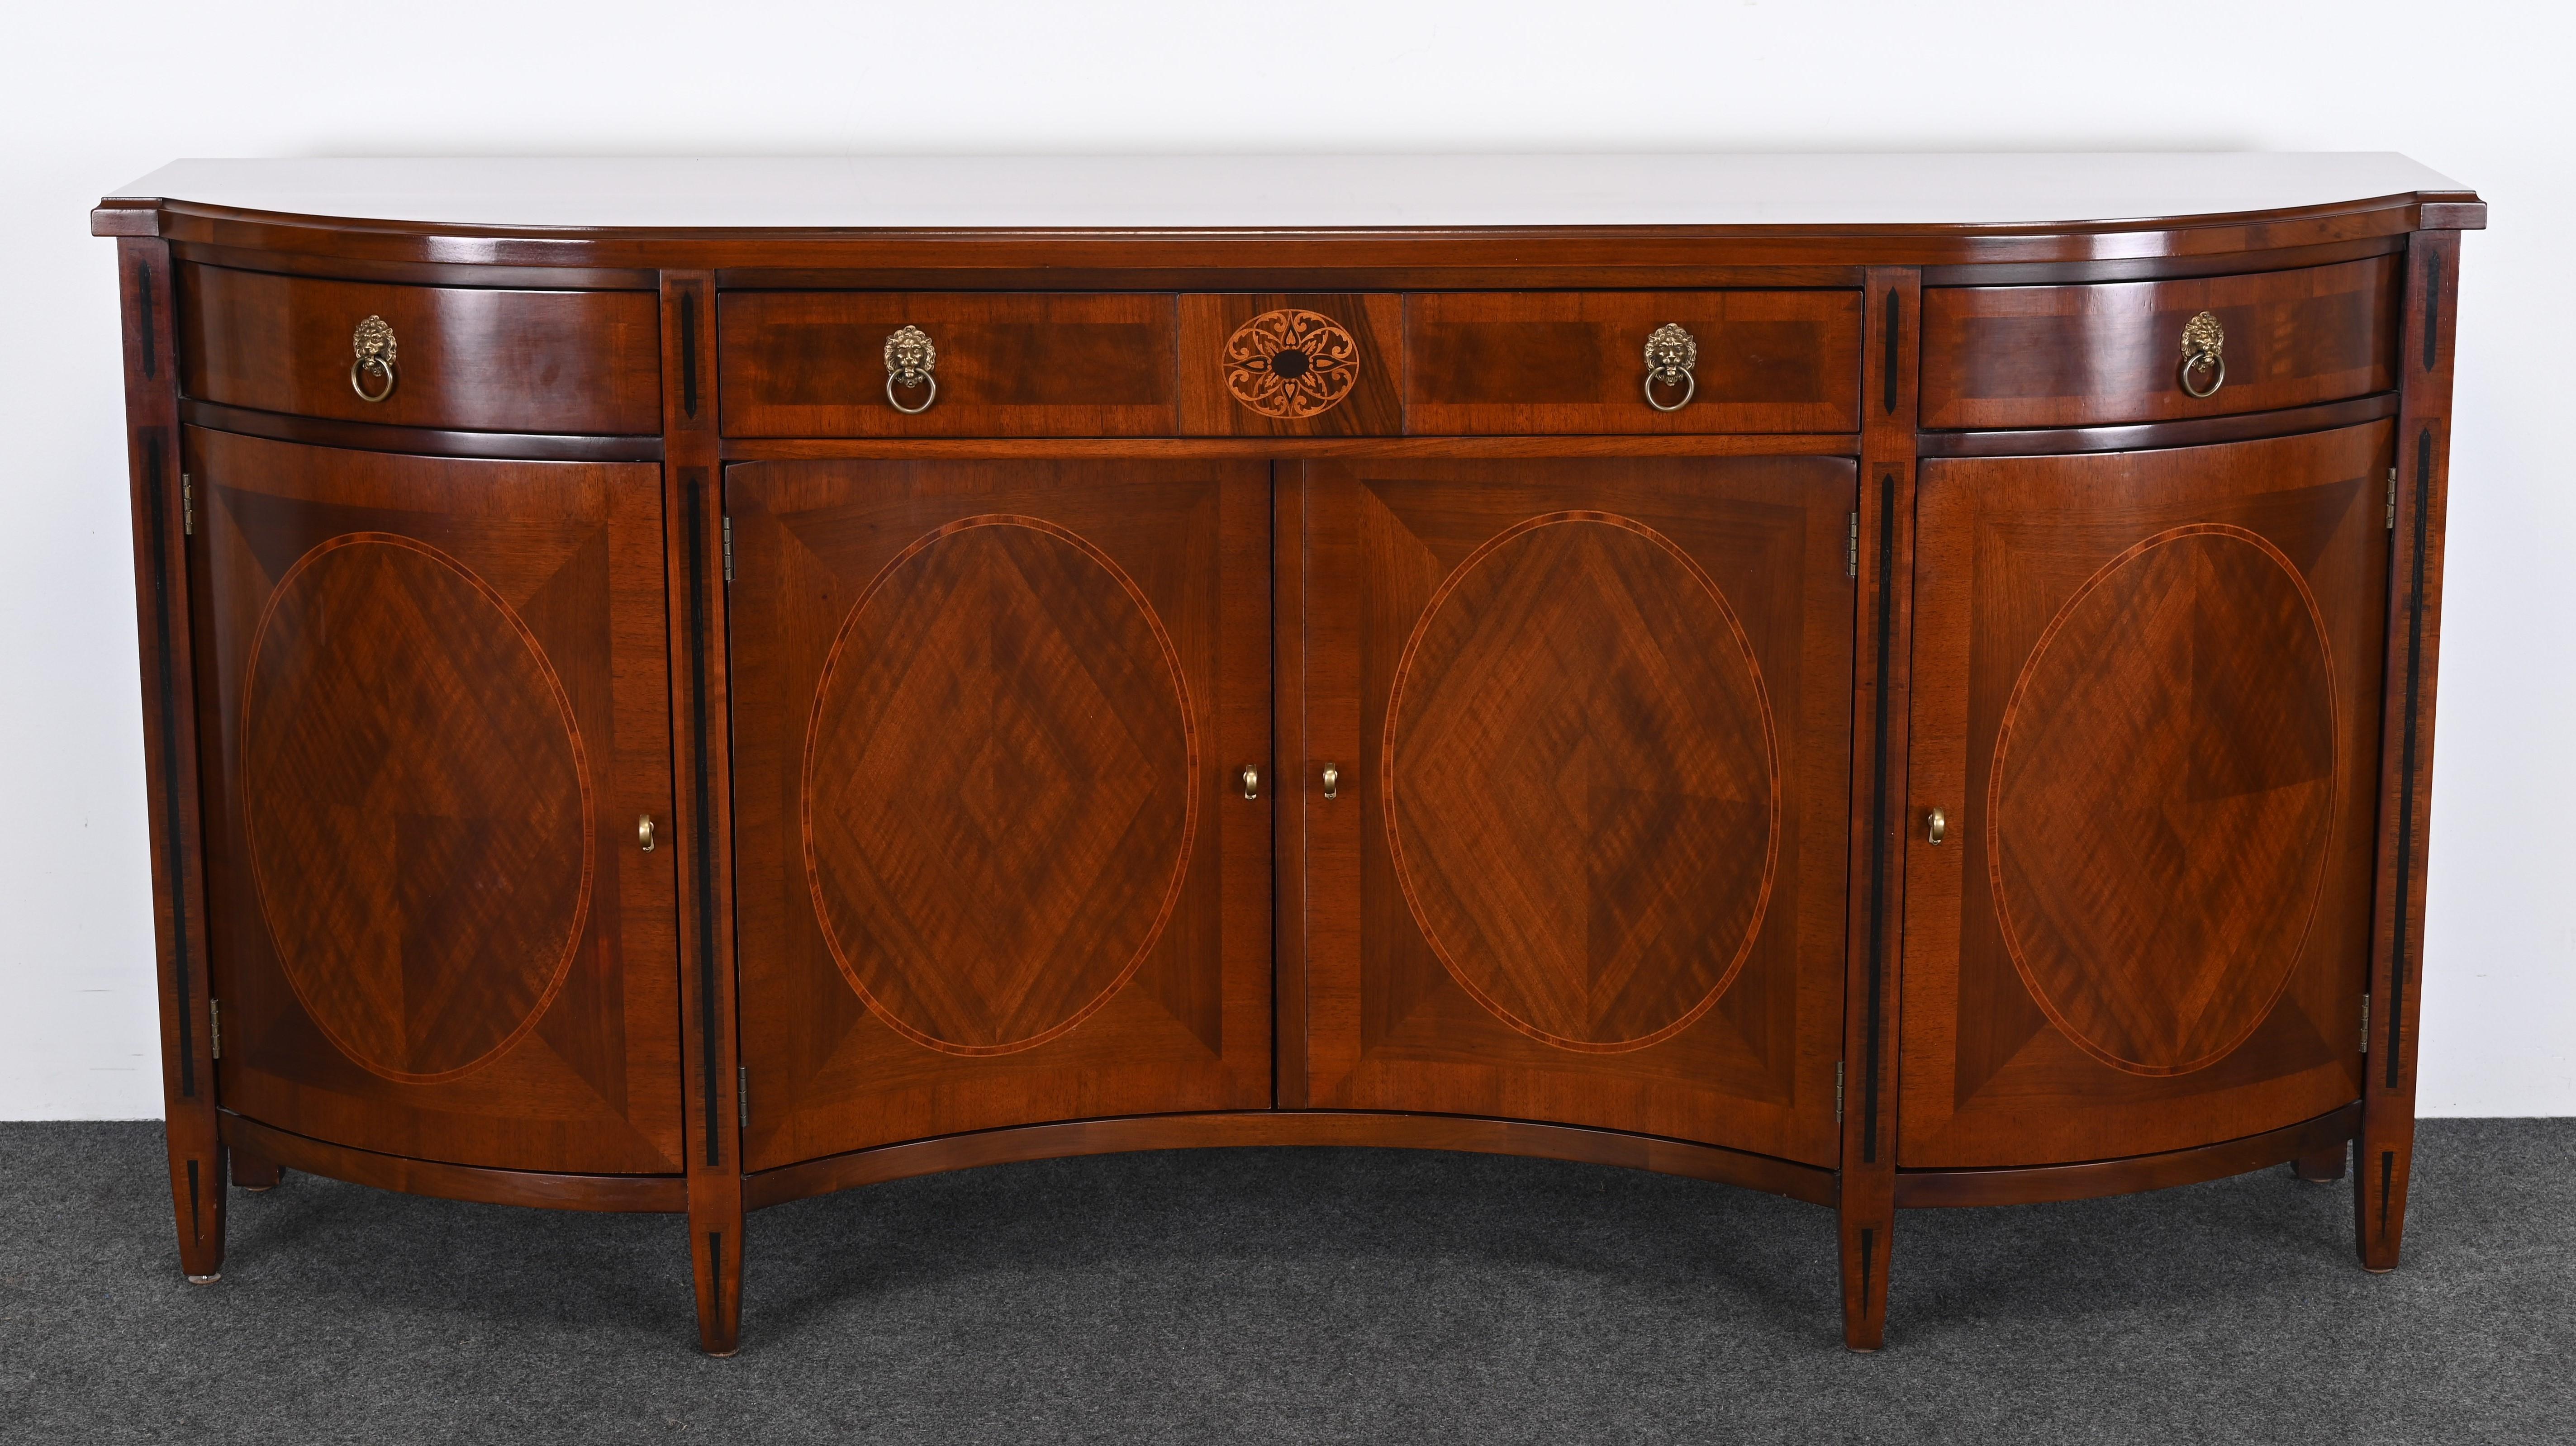 A beautiful Neoclassical sideboard or credenza made by John Widdicomb Furniture Company. This handsome sideboard is made of walnut with fine fruitwood, ebony, and mahogany inlays in the decoration. This piece retailed for $16,000. The functionality